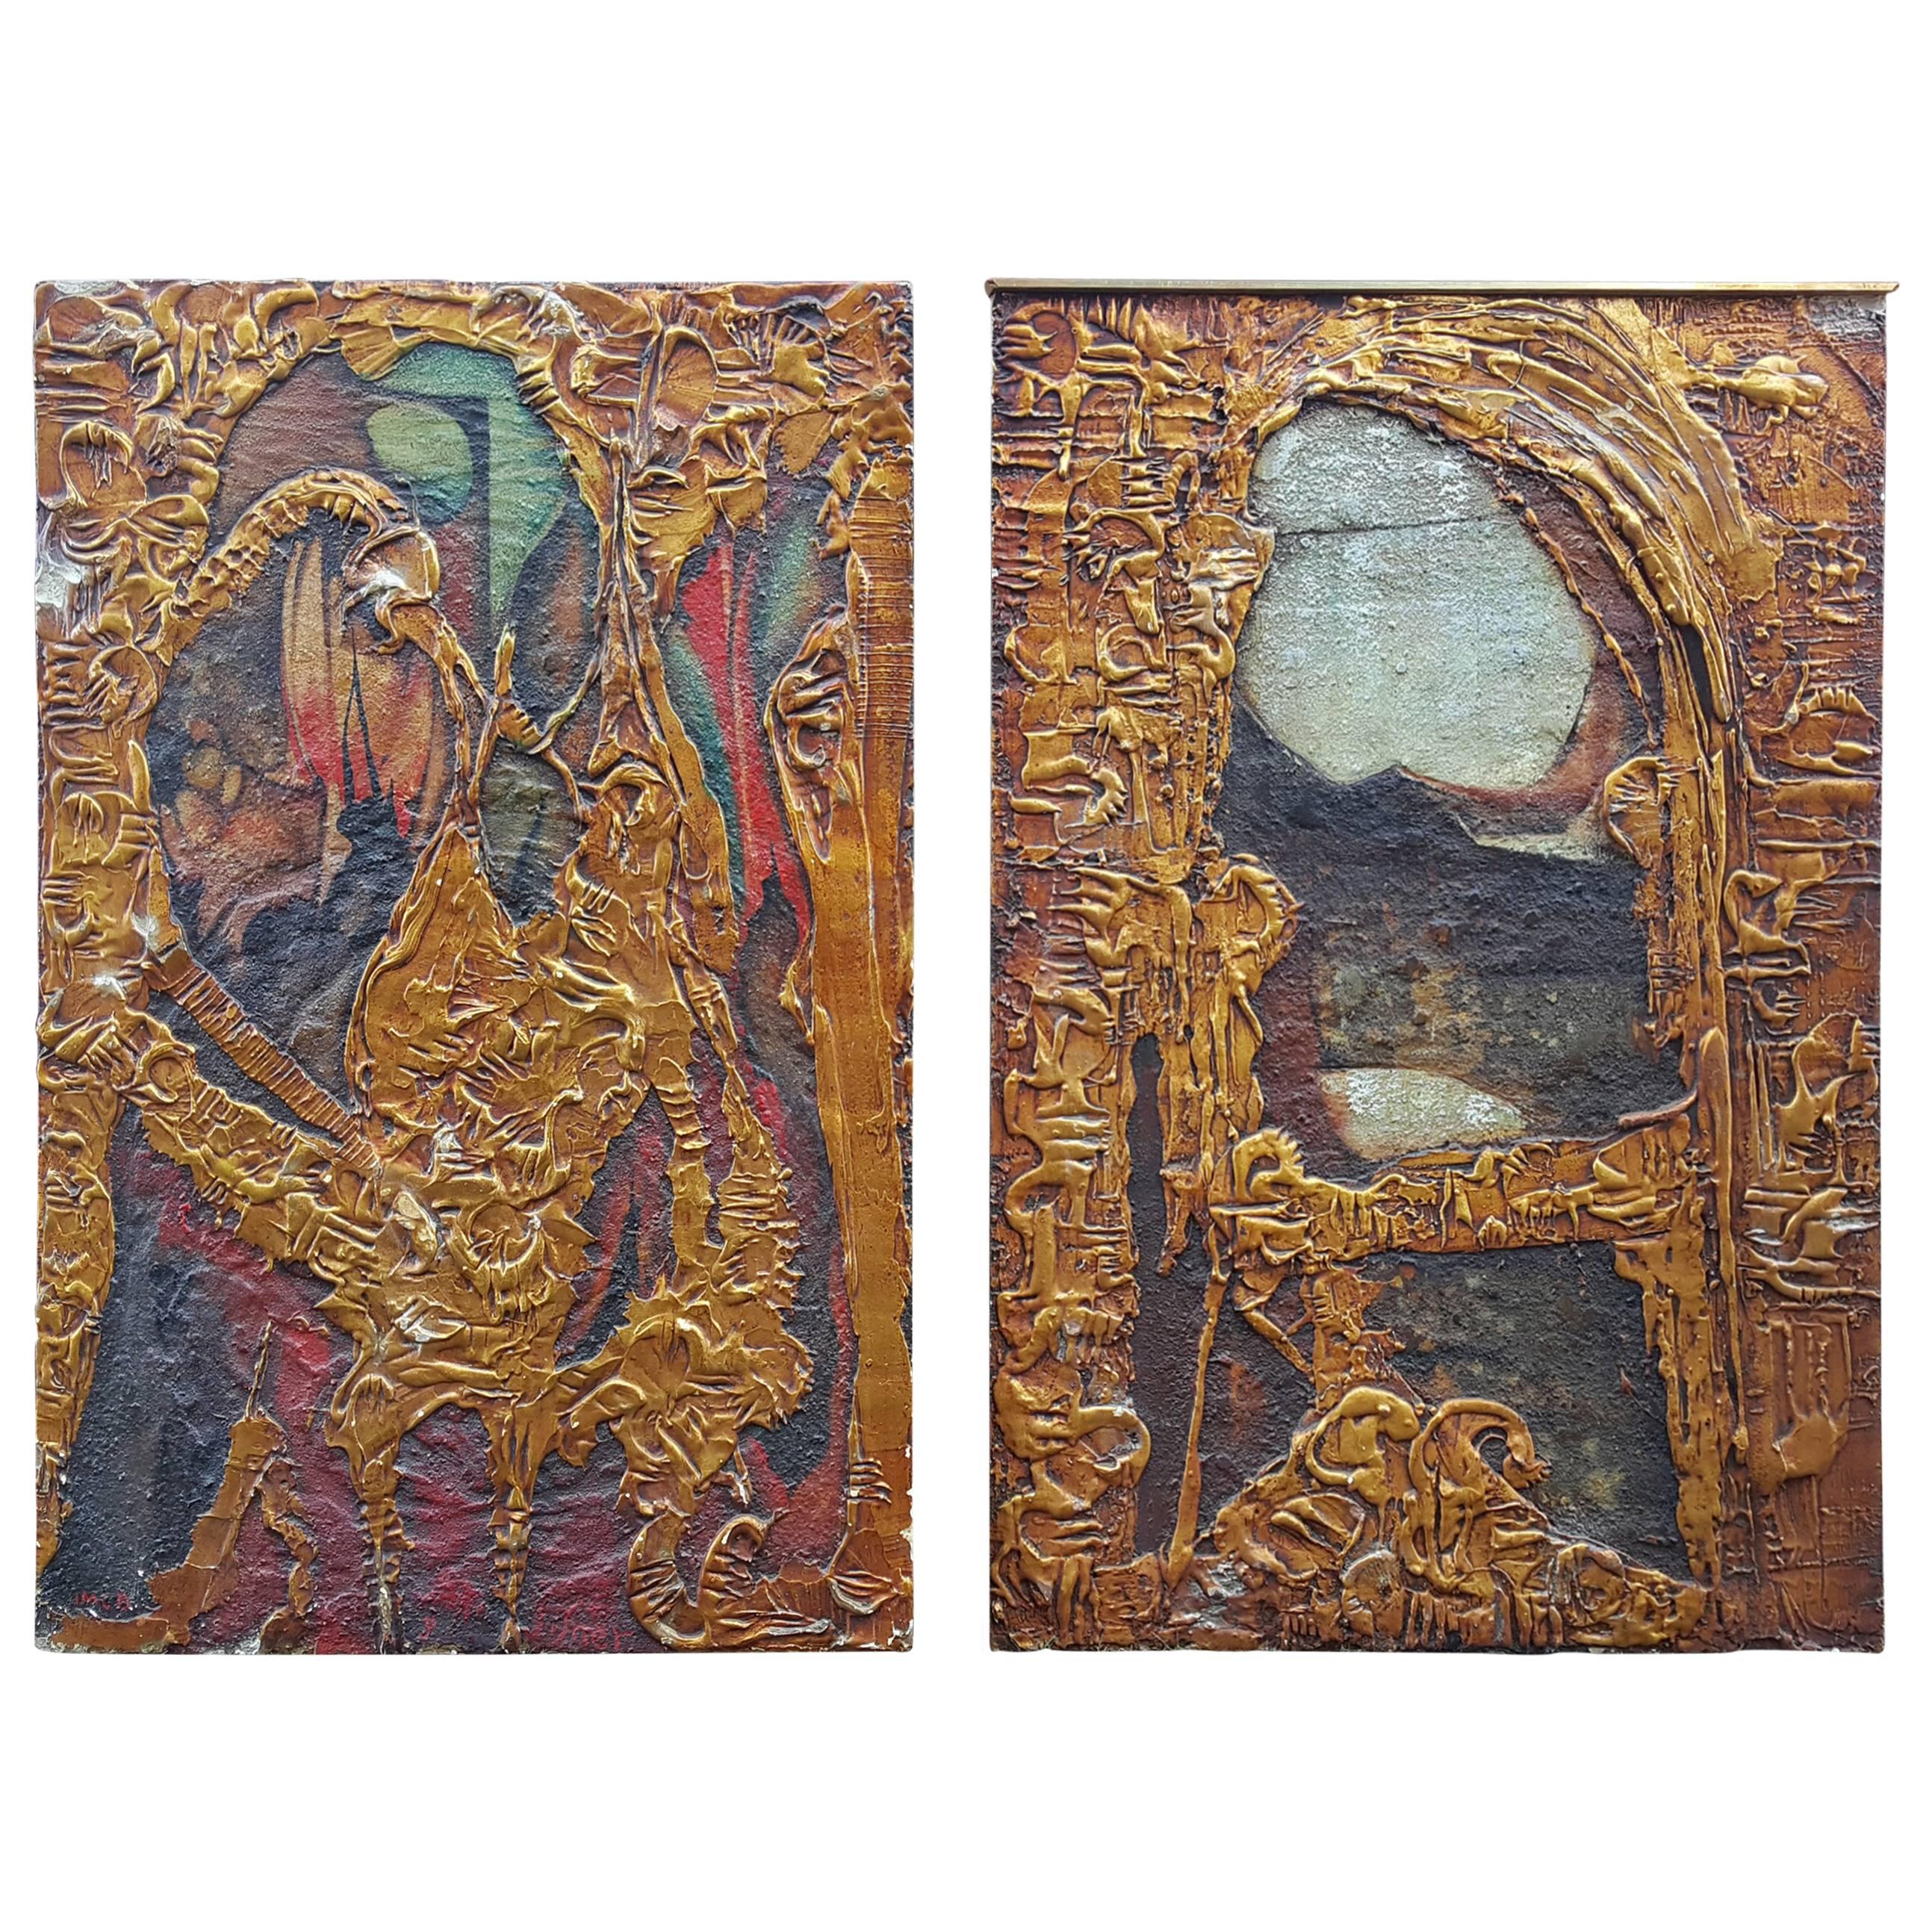 Surrealist Heavy Gold Gilt Imposto Paintings, 1970s Glenn Fisher, Bflo. N. Y For Sale